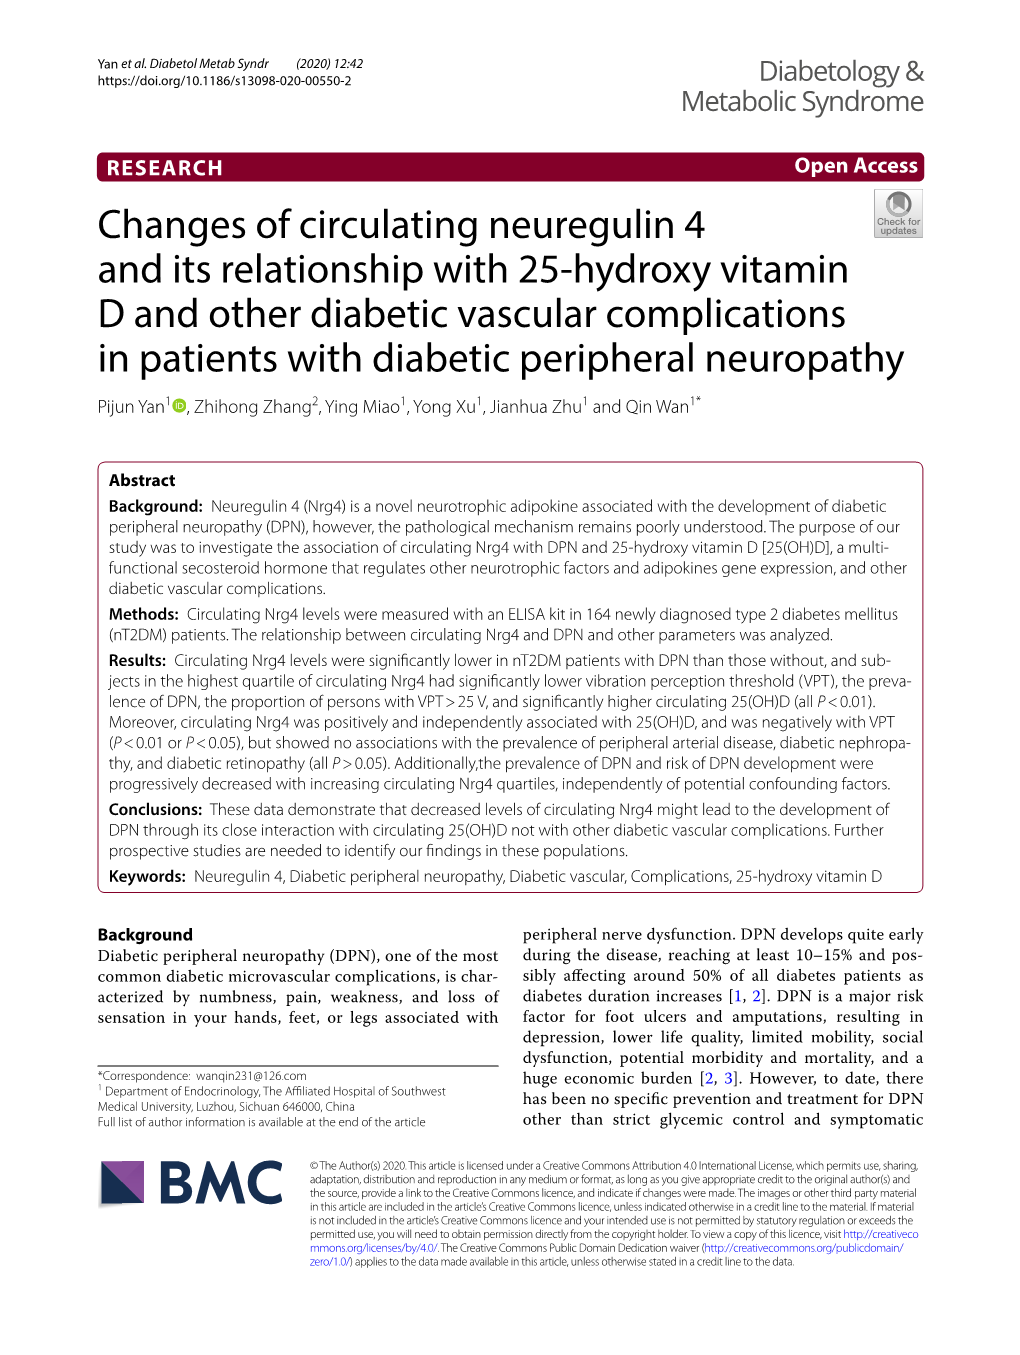 Changes of Circulating Neuregulin 4 and Its Relationship with 25-Hydroxy